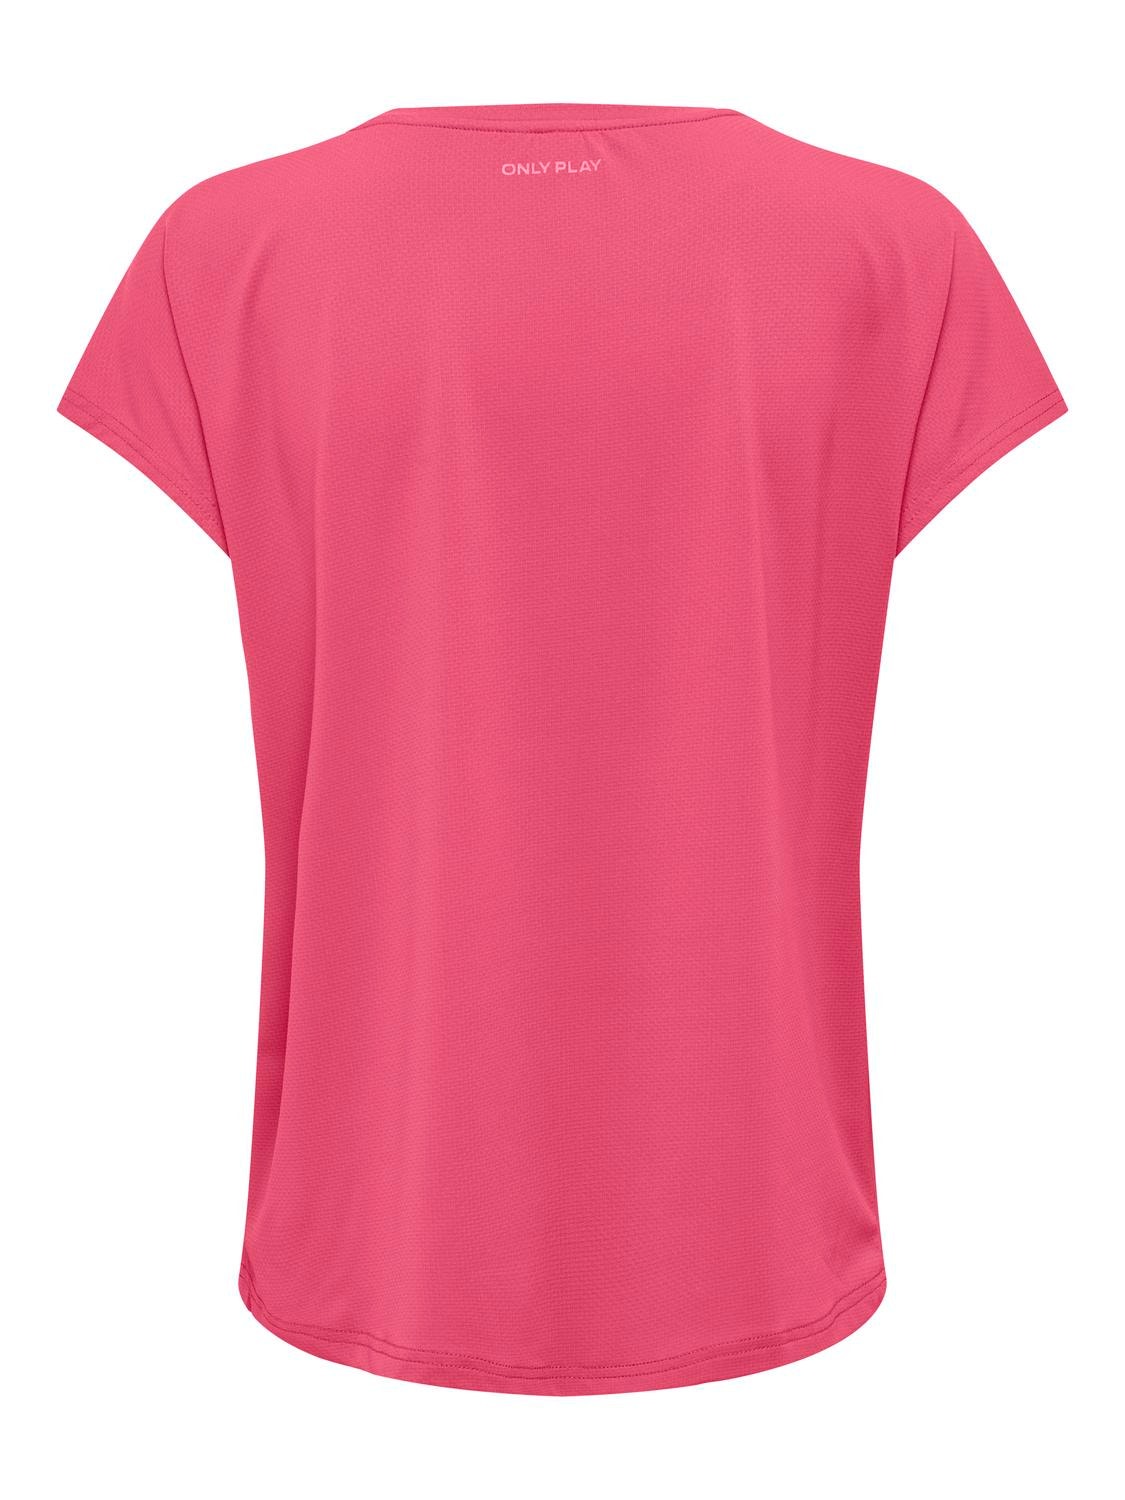 ONLY Loose Fit Round Neck Batwing sleeves T-Shirt -Raspberry Sorbet - 15311799